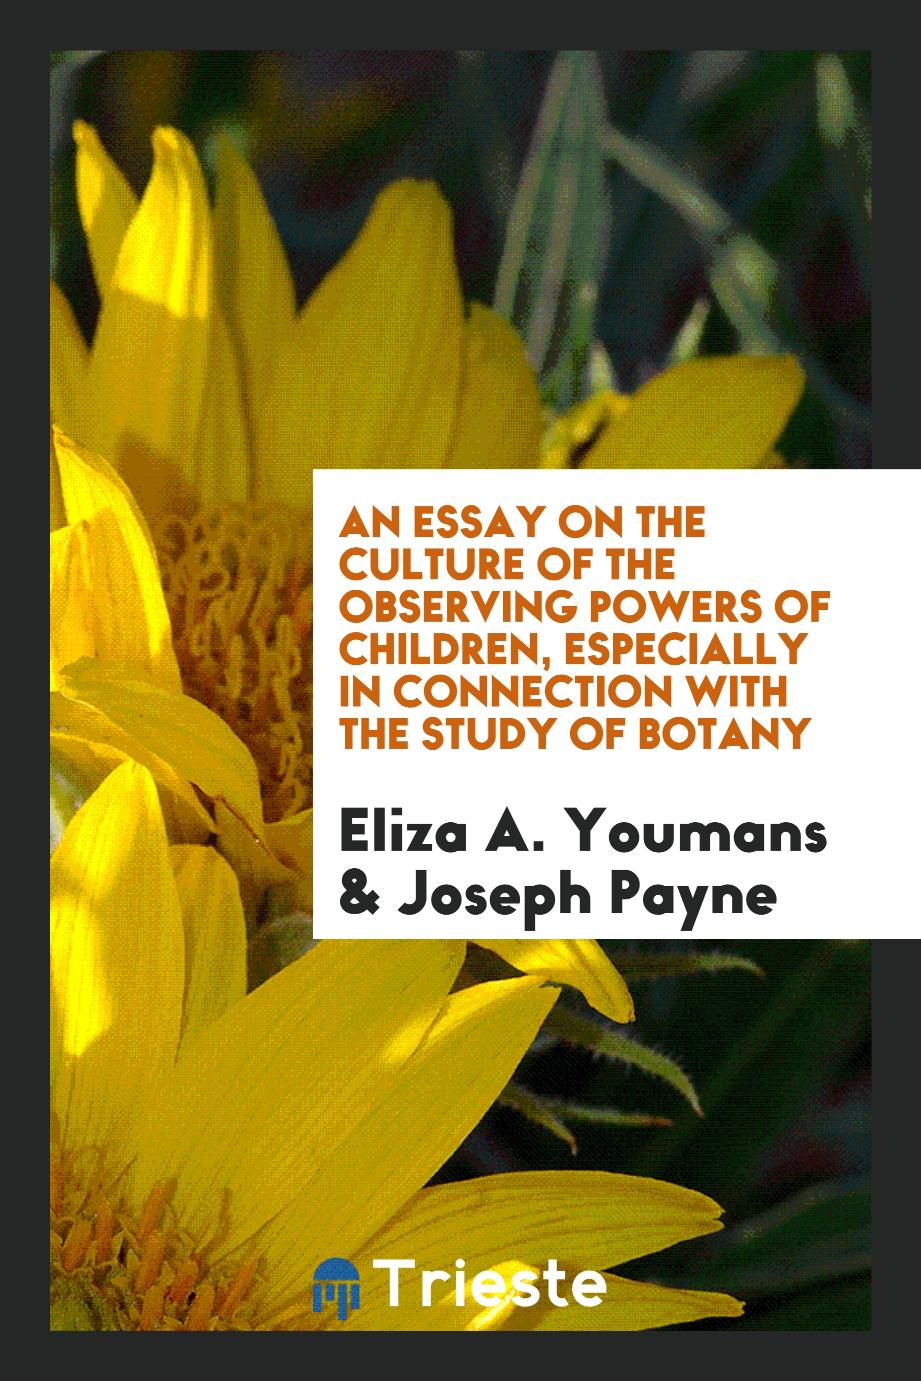 An Essay on the Culture of the Observing Powers of Children, Especially in Connection with the Study of Botany